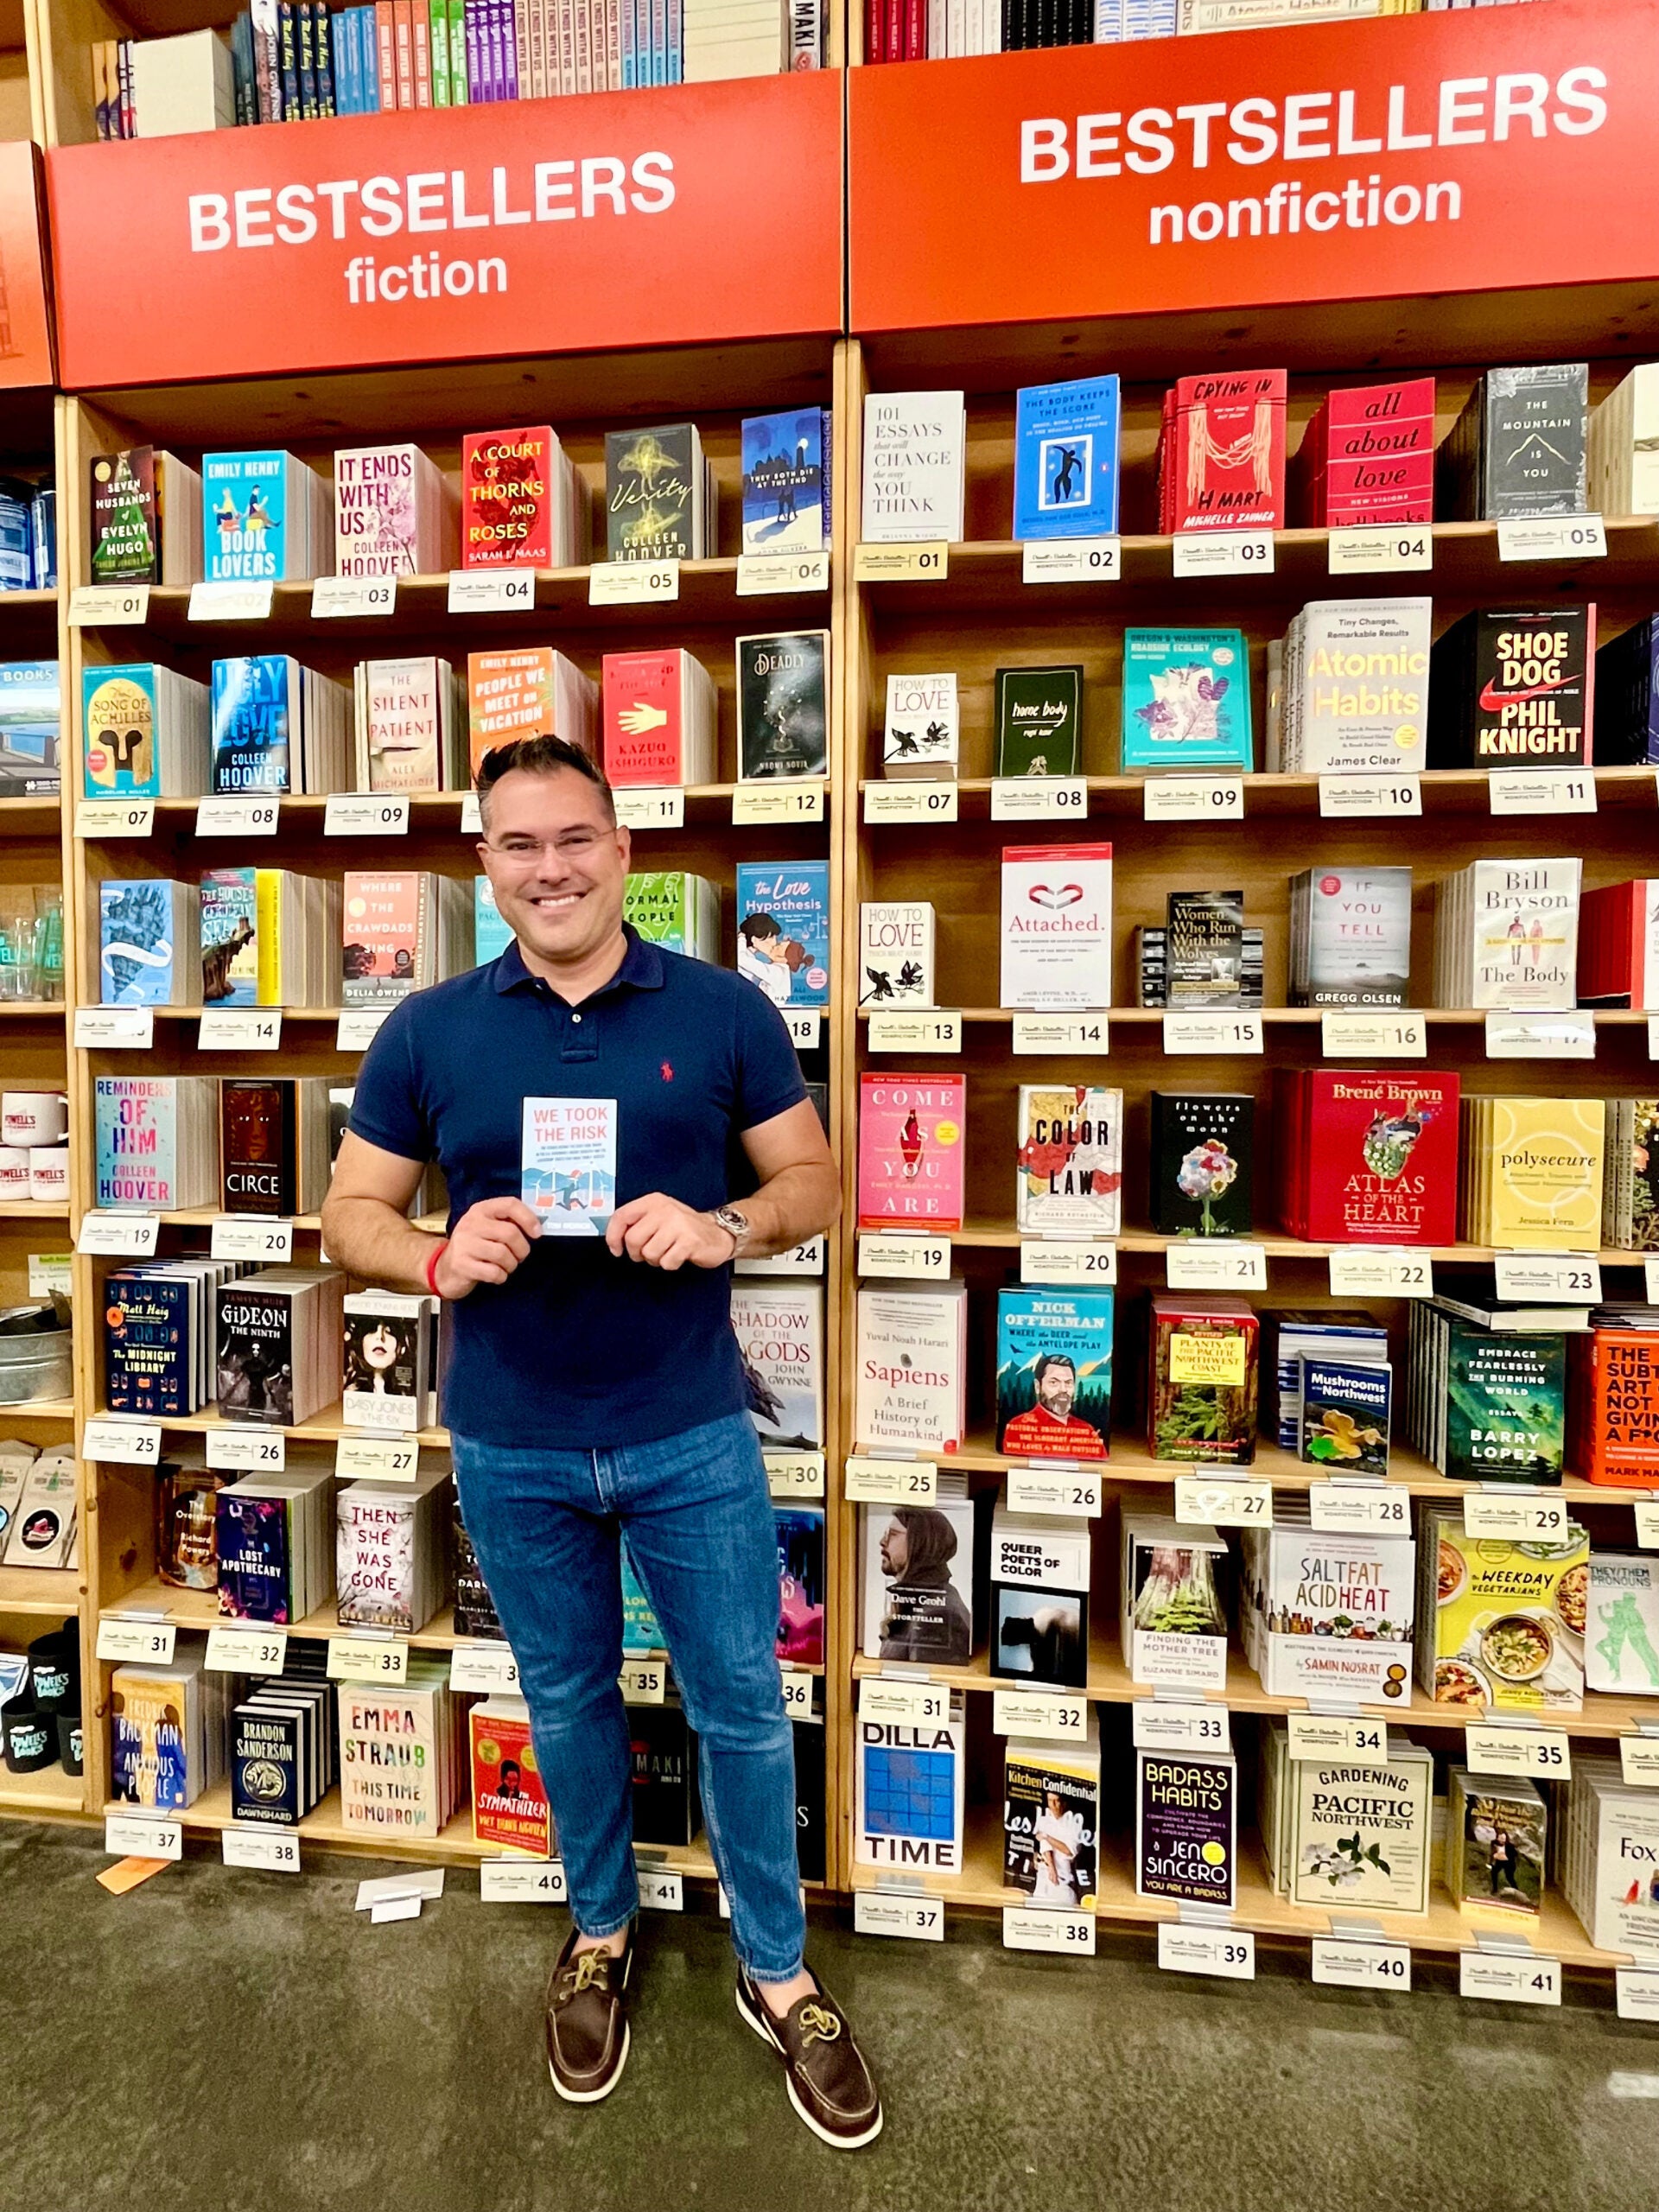 a man stands with a book in front of a book shelf display